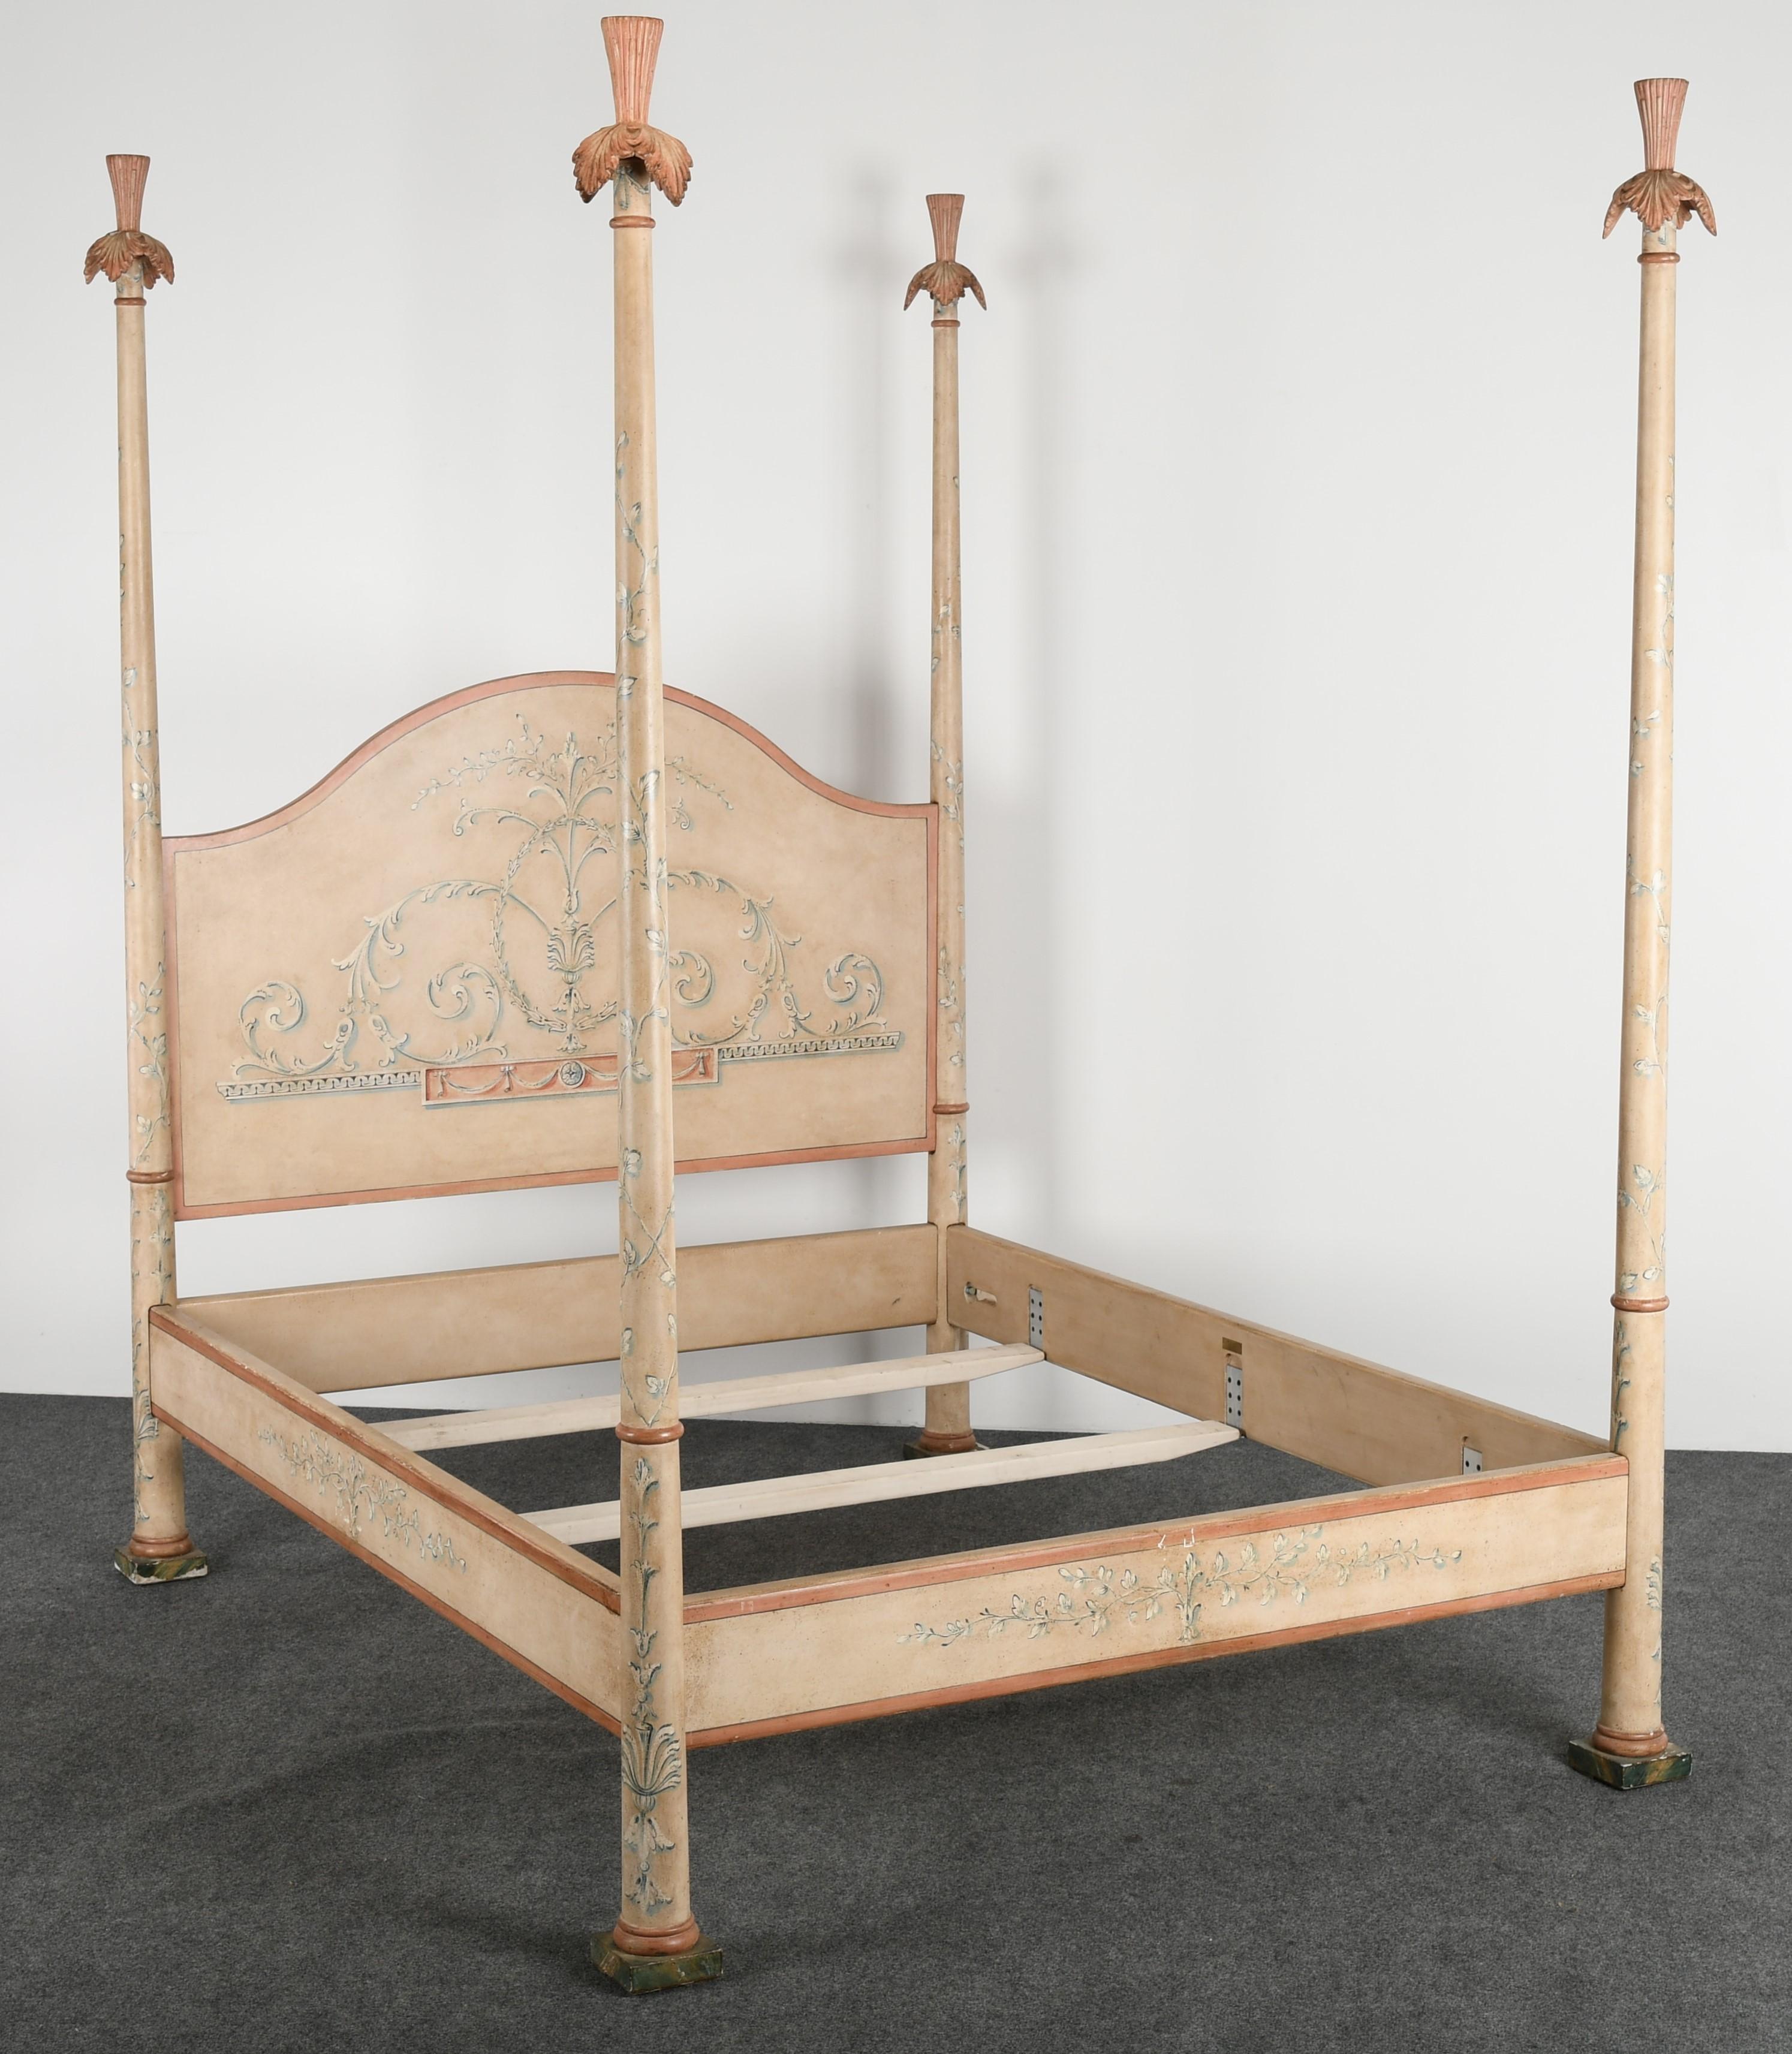 A Queen size Bohemian Italian painted poster bed by Patina Furniture Company, makers of fine painted furniture. Good condition with some paint flaking as shown in images. Age-appropriate wear. This poster bed was approximately $3,000 new.

